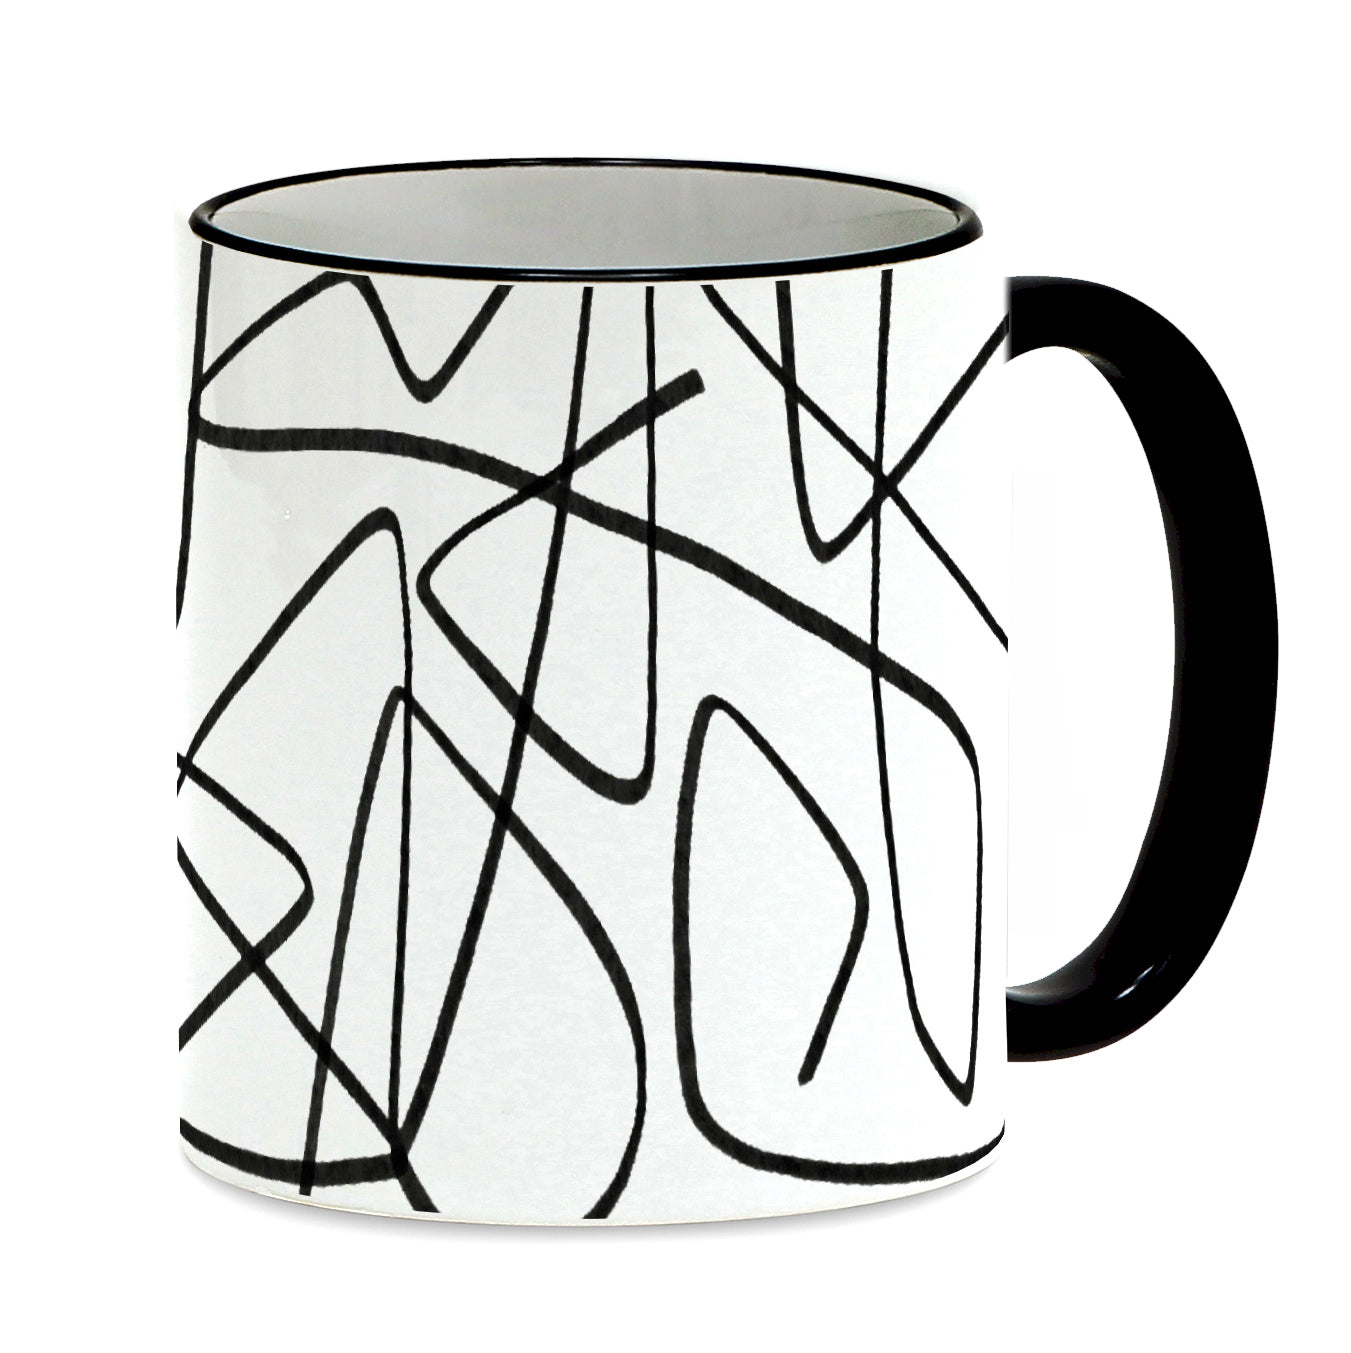 SUBLIMART: Lineart - Mug with black handle and rim featuring hand drawn line drawings. (Design #10)